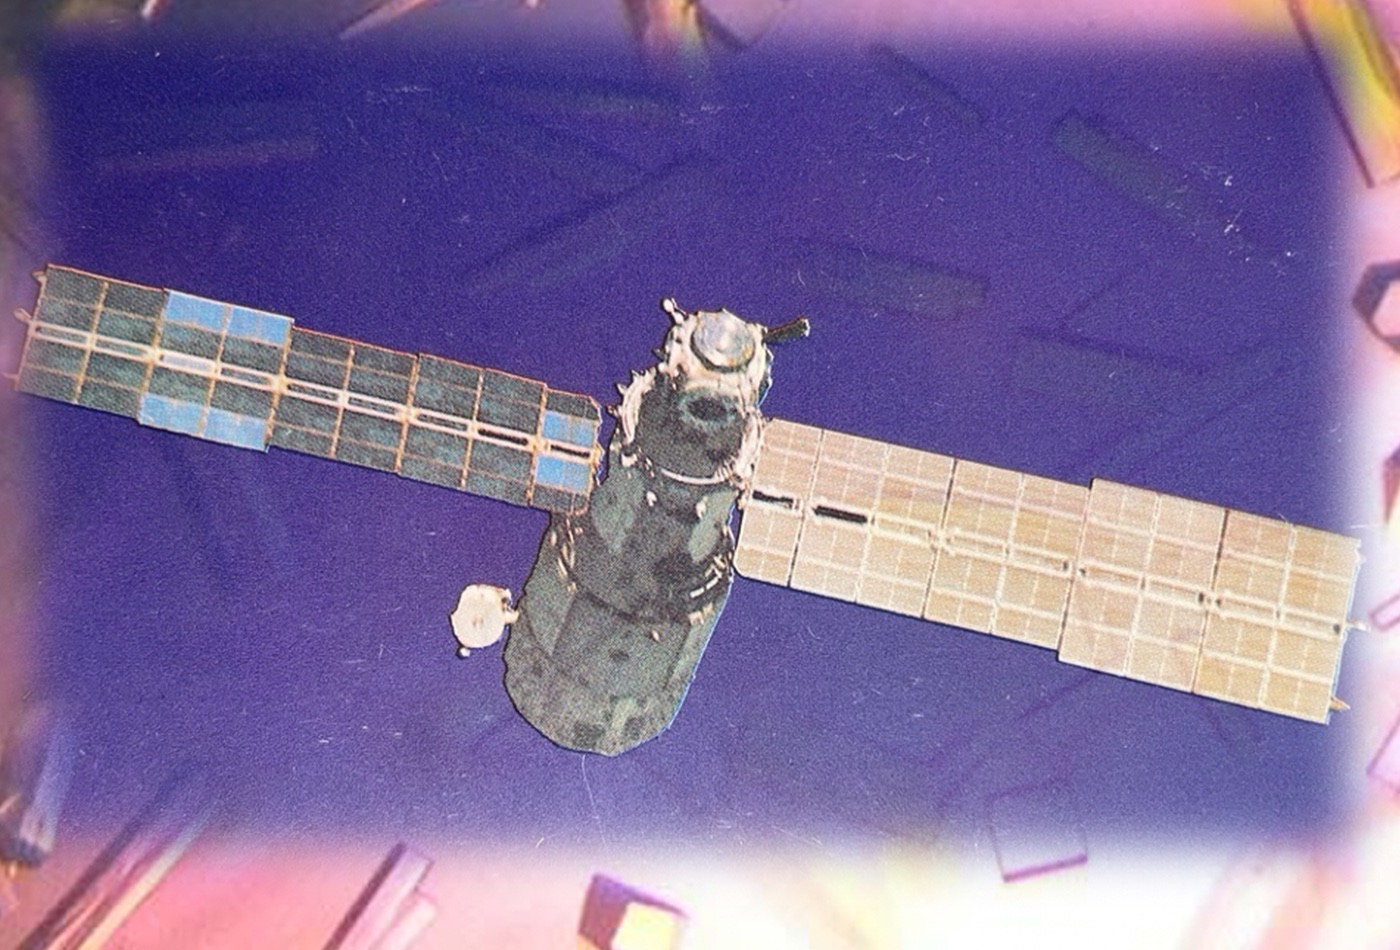 The Russian Space Station MIR